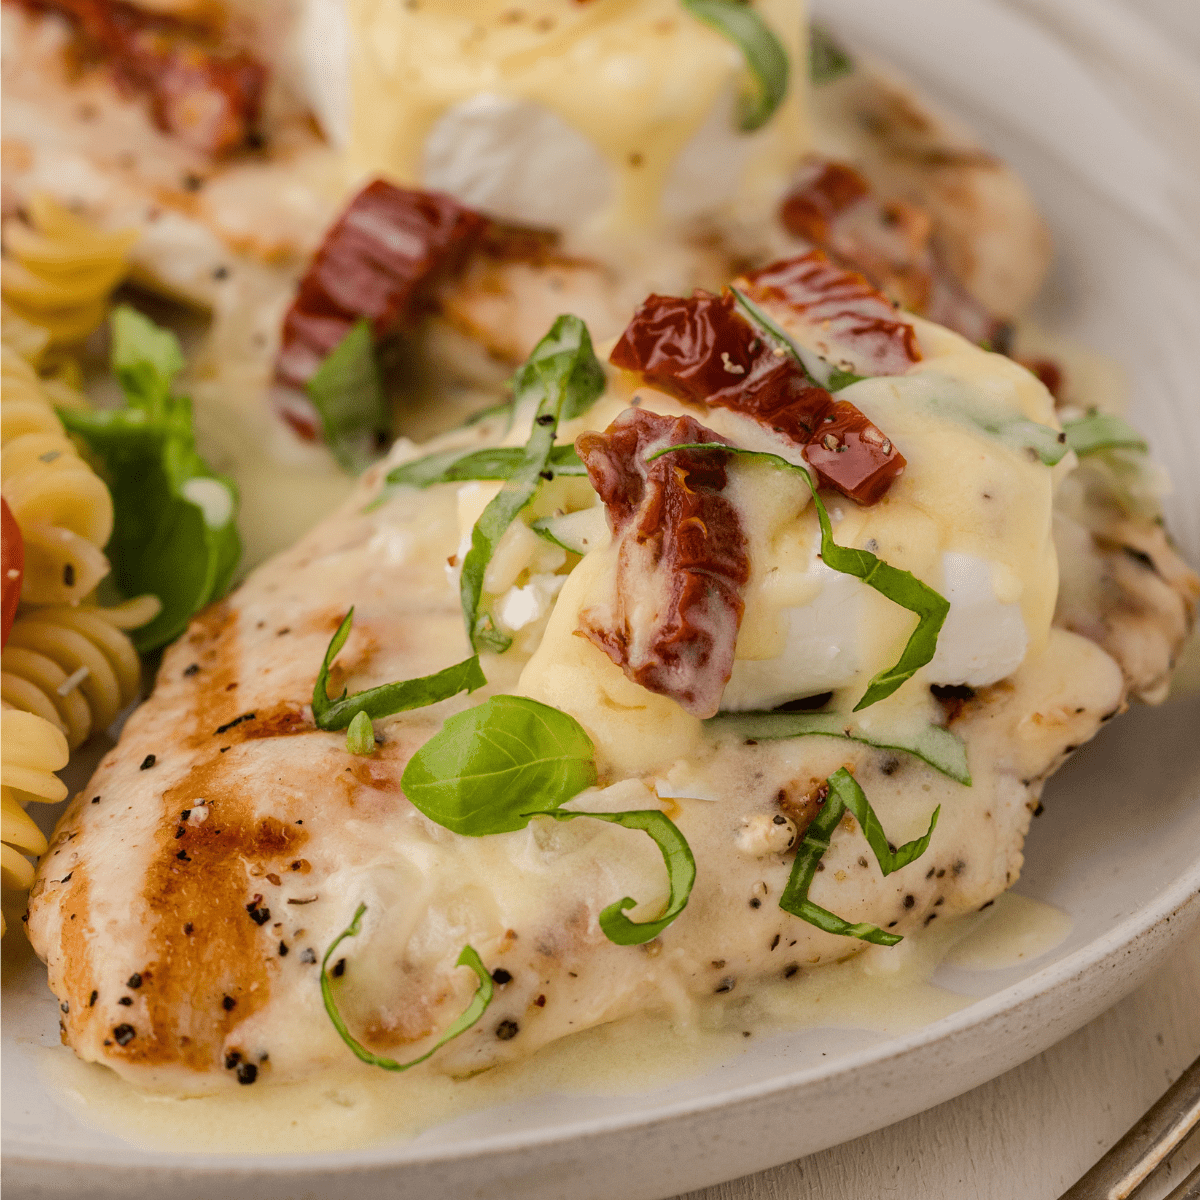 a close up of Carrabba's chicken bryan copycat recipe with sun-dried tomatoes, goat cheese, basil, and lemon butter sauce